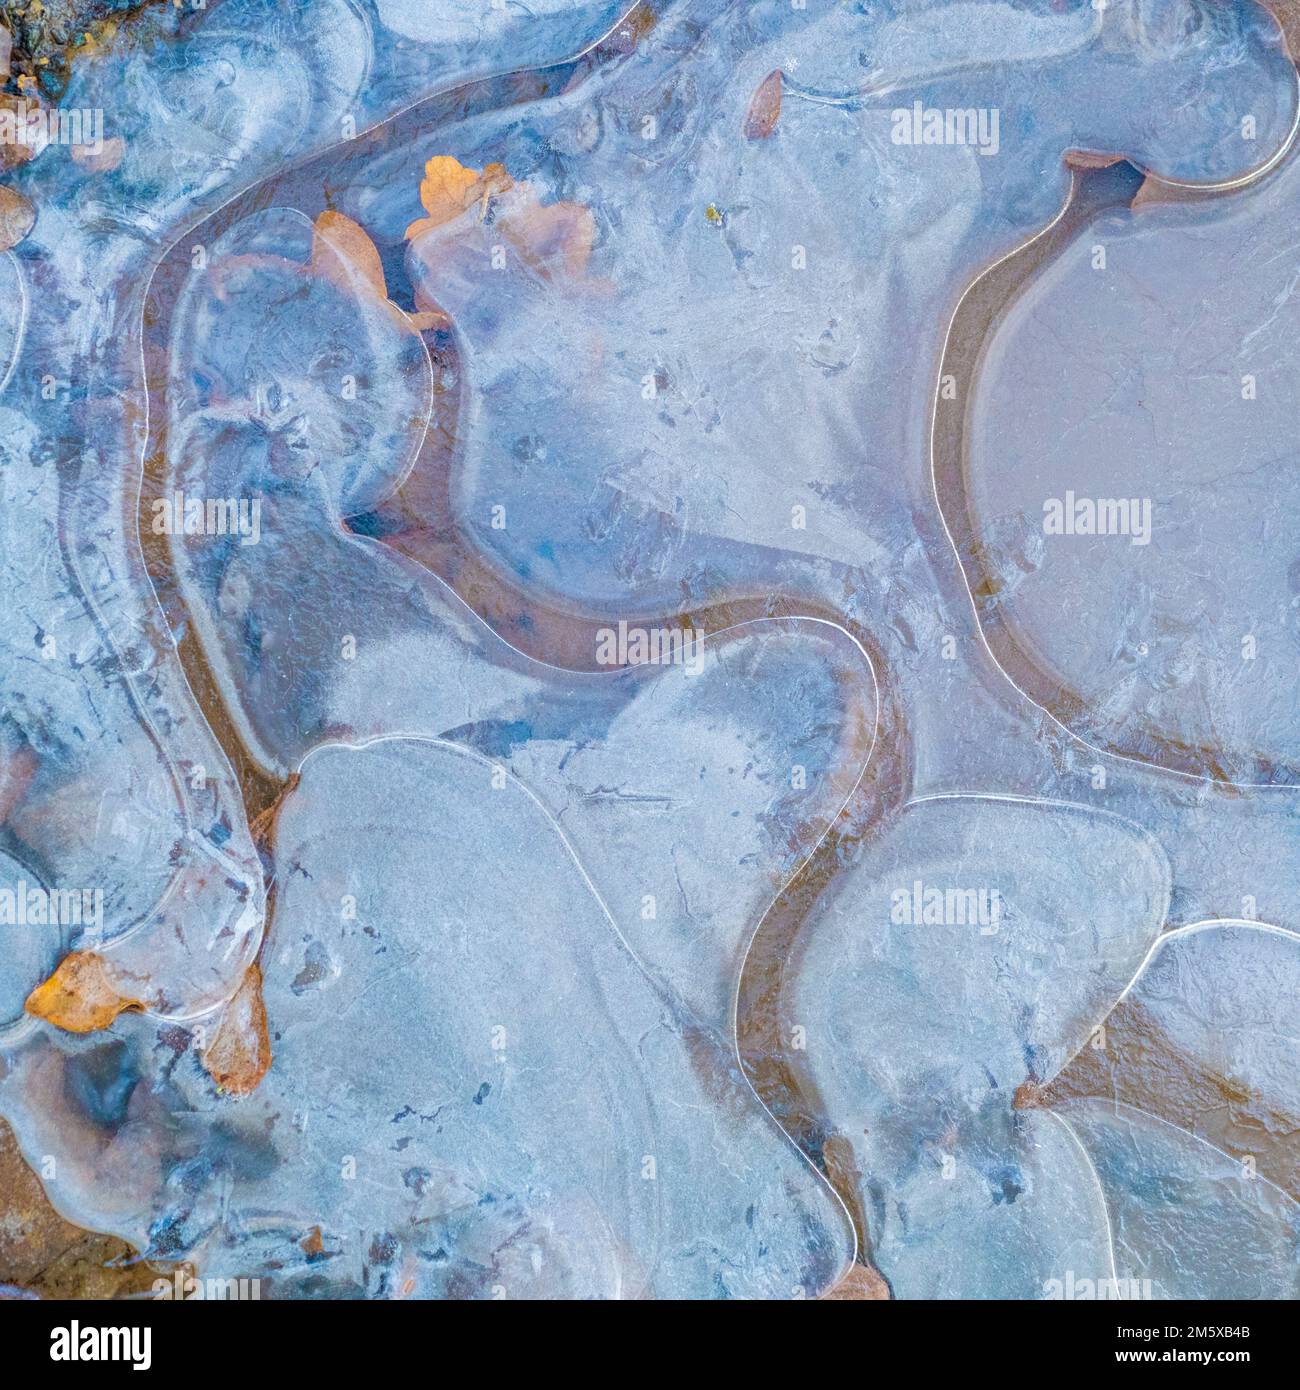 Air bubbles caught under frozen water in puddle. Colours pushed a little to bring out blue in sky and dead orange-yellow leaves. Abstract winter. Stock Photo